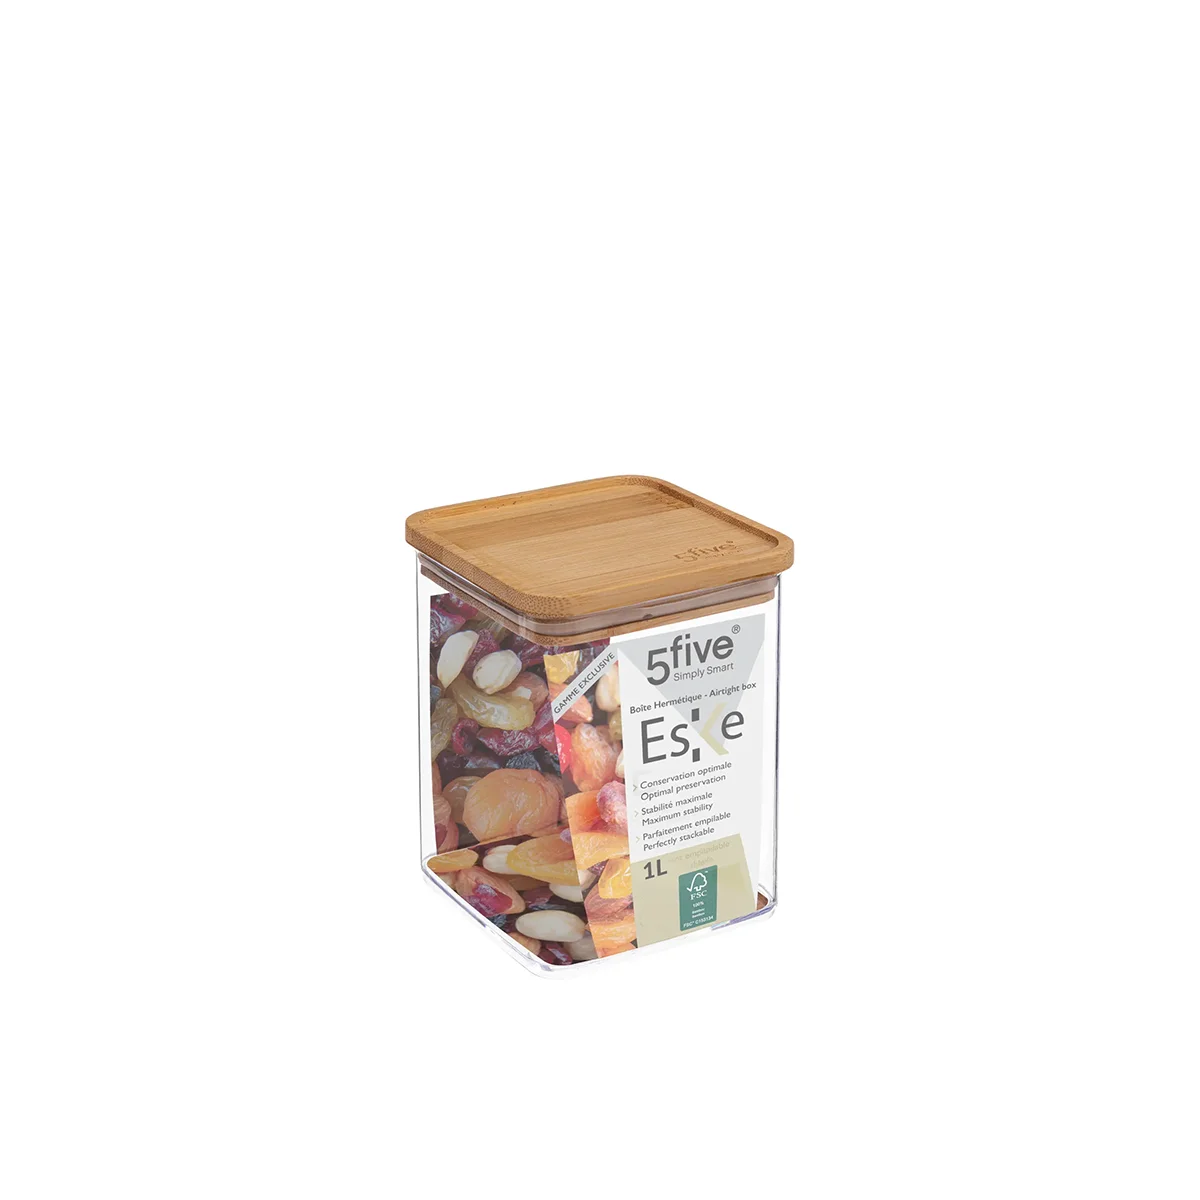 5 Five Simply Smart Square Can With Bamboo Lid 1.0 L - SuperStore